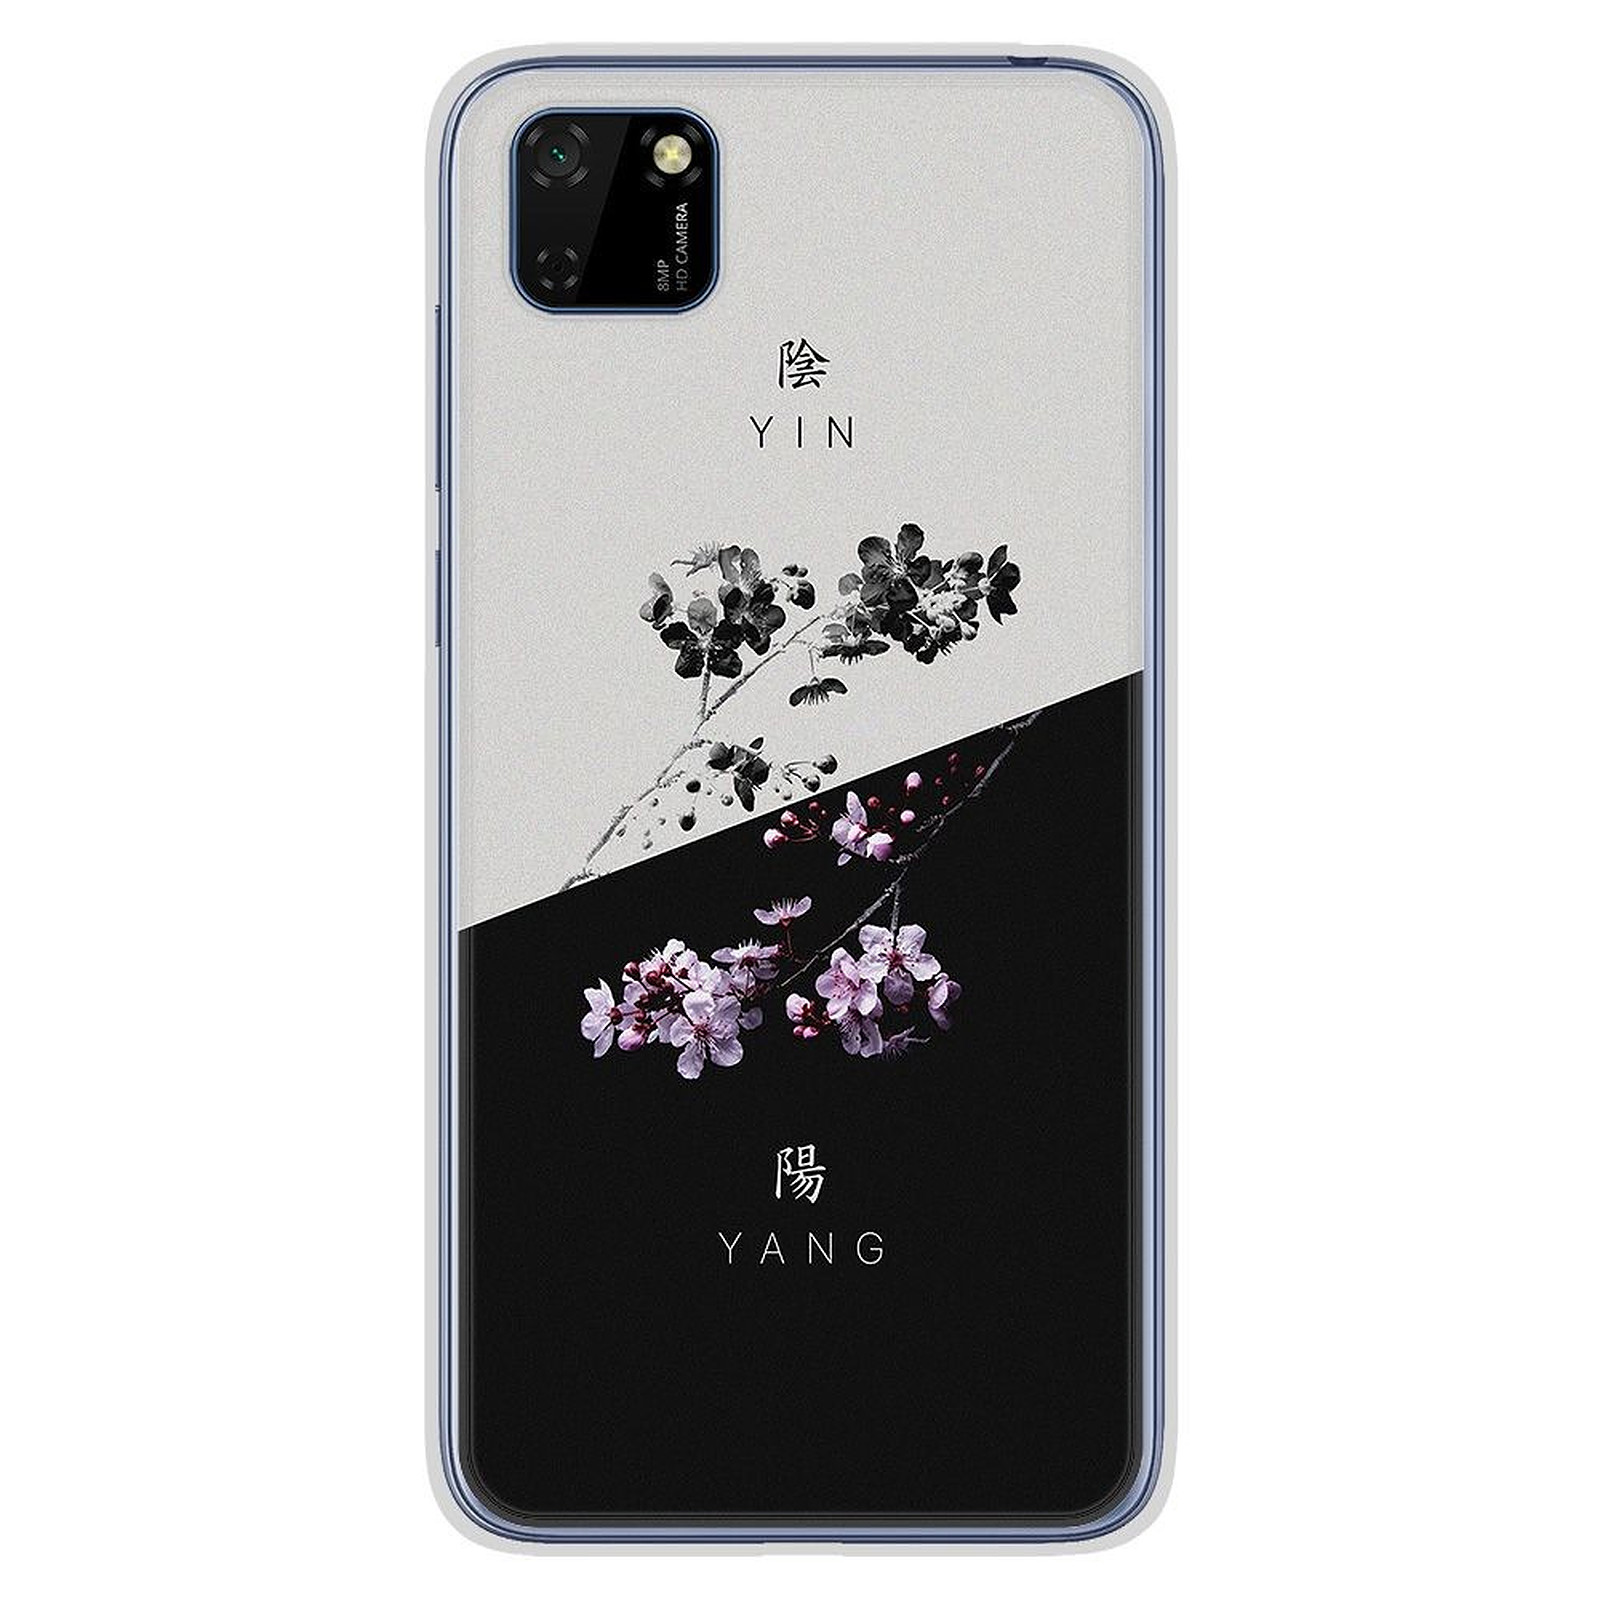 1001 Coques Coque silicone gel Huawei Y5P motif Yin et Yang - Coque telephone 1001Coques